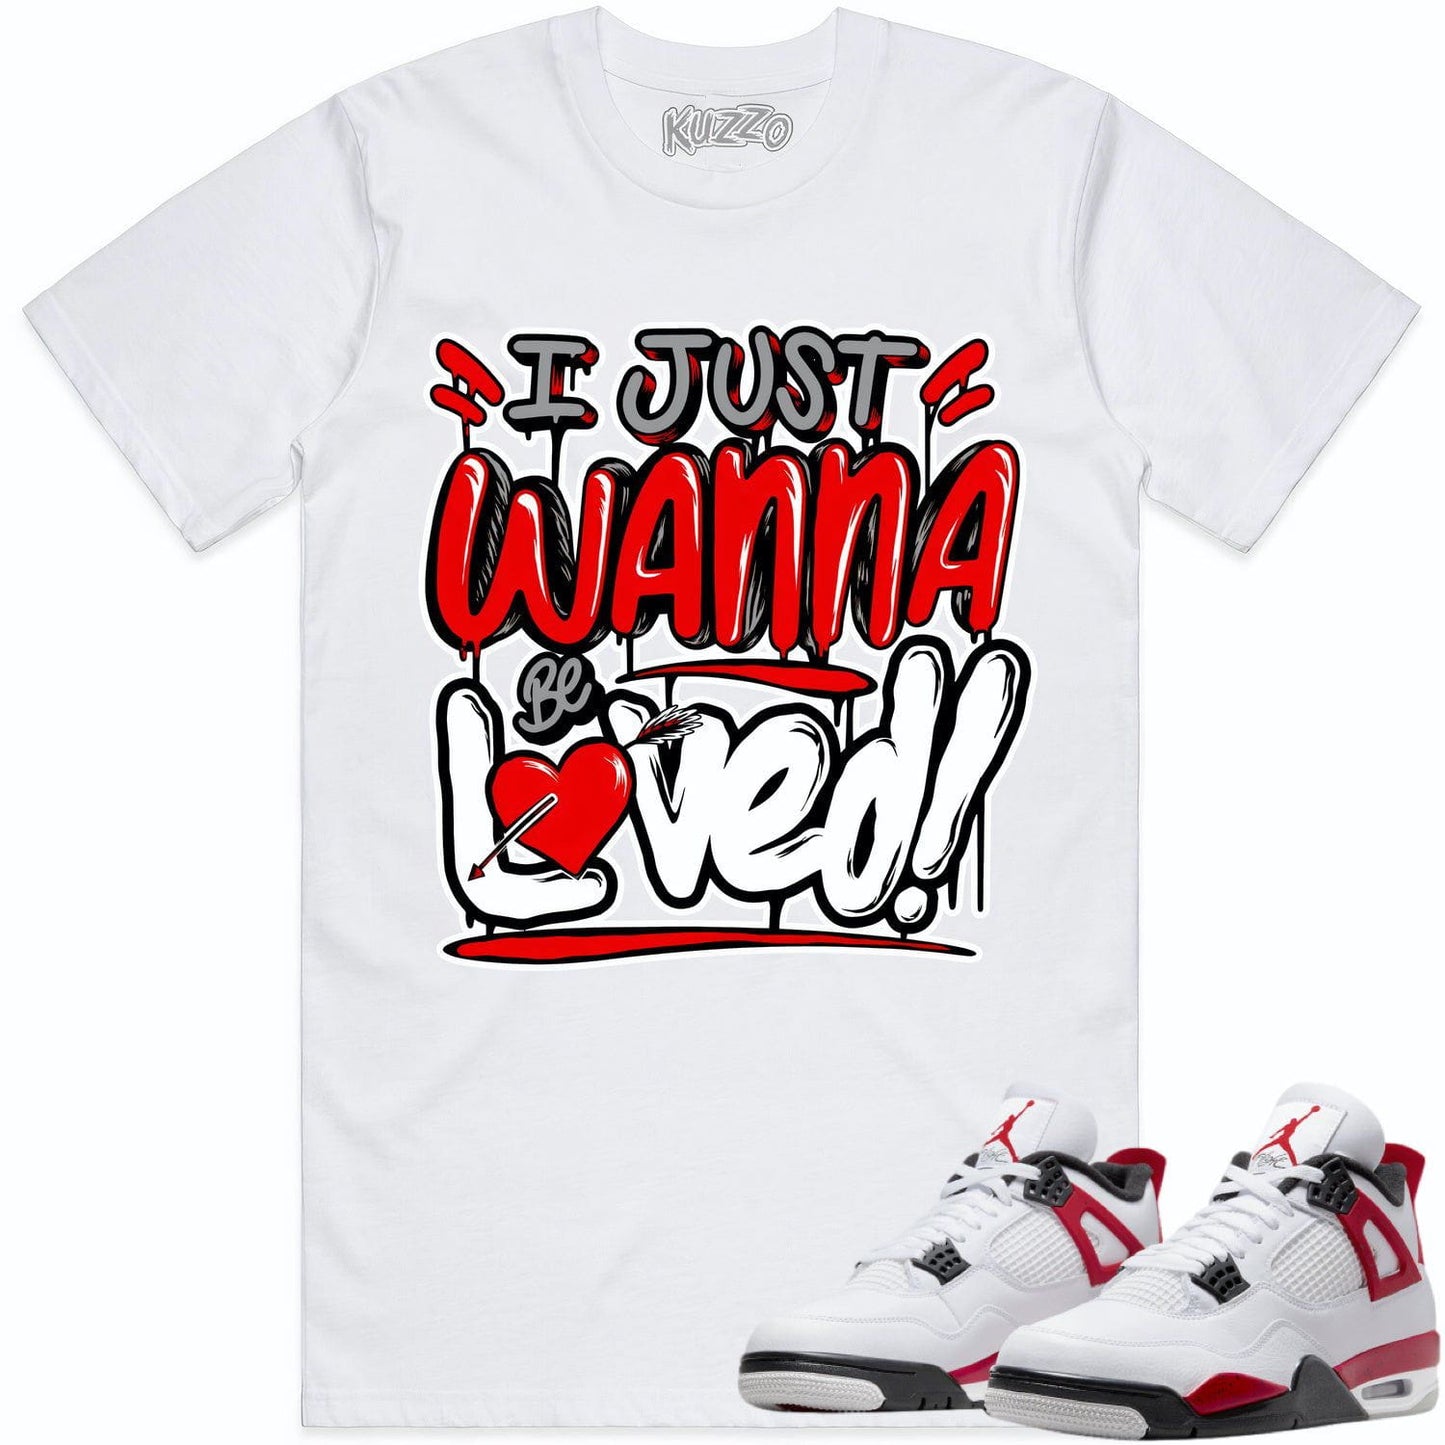 Red Cement 4s Shirt - Jordan Retro 4 Red Cement Shirts - Red Loved